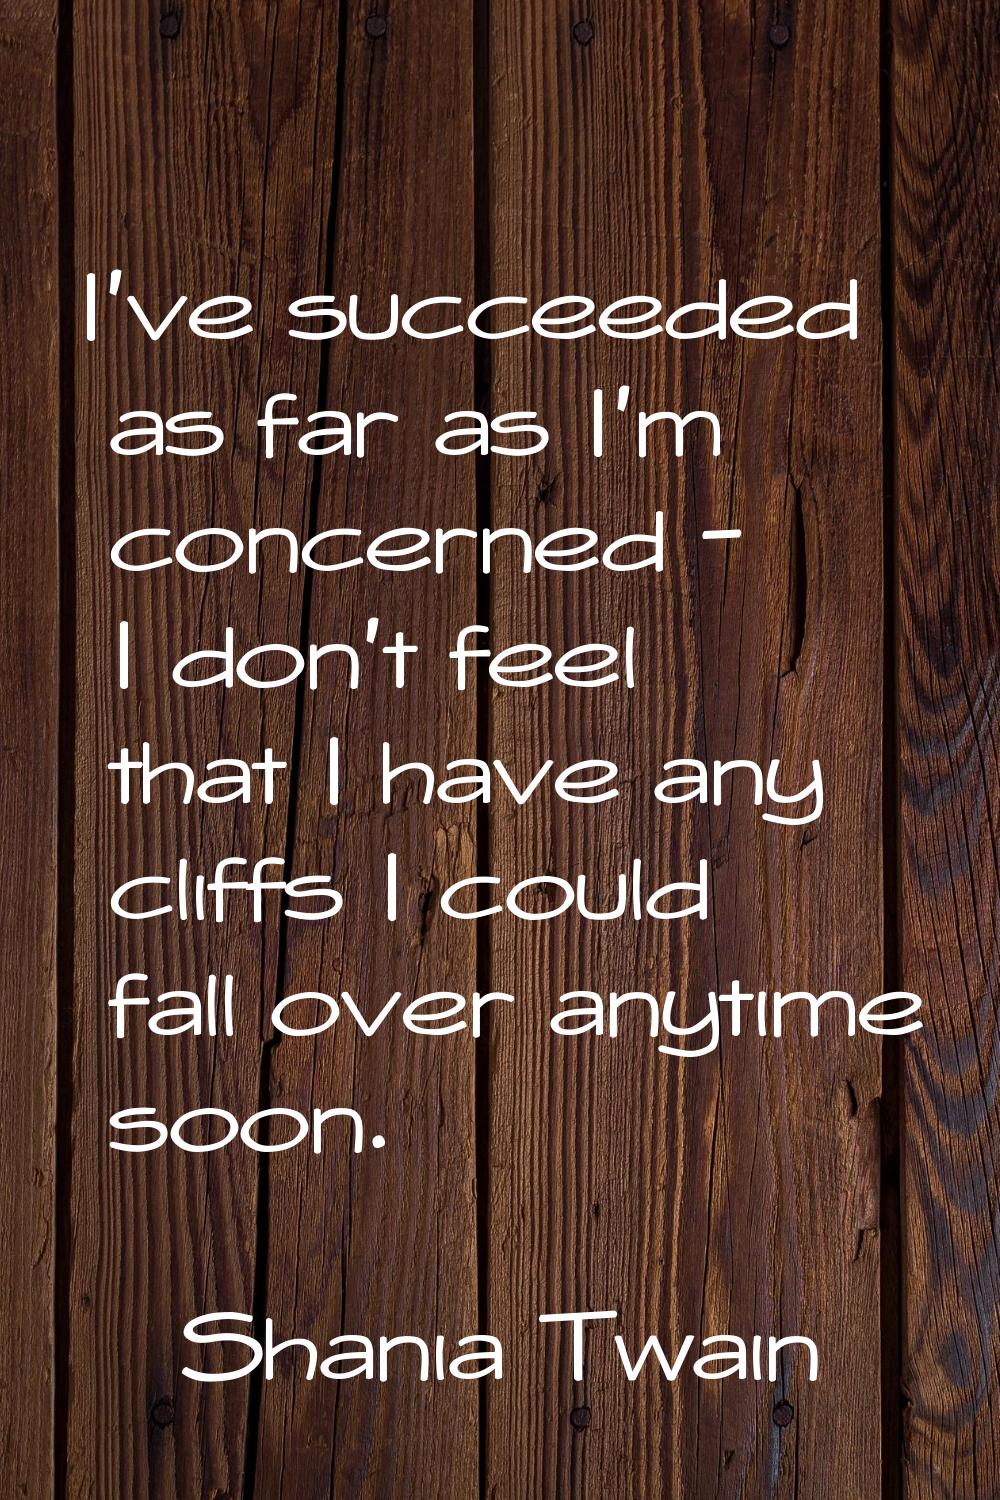 I've succeeded as far as I'm concerned - I don't feel that I have any cliffs I could fall over anyt